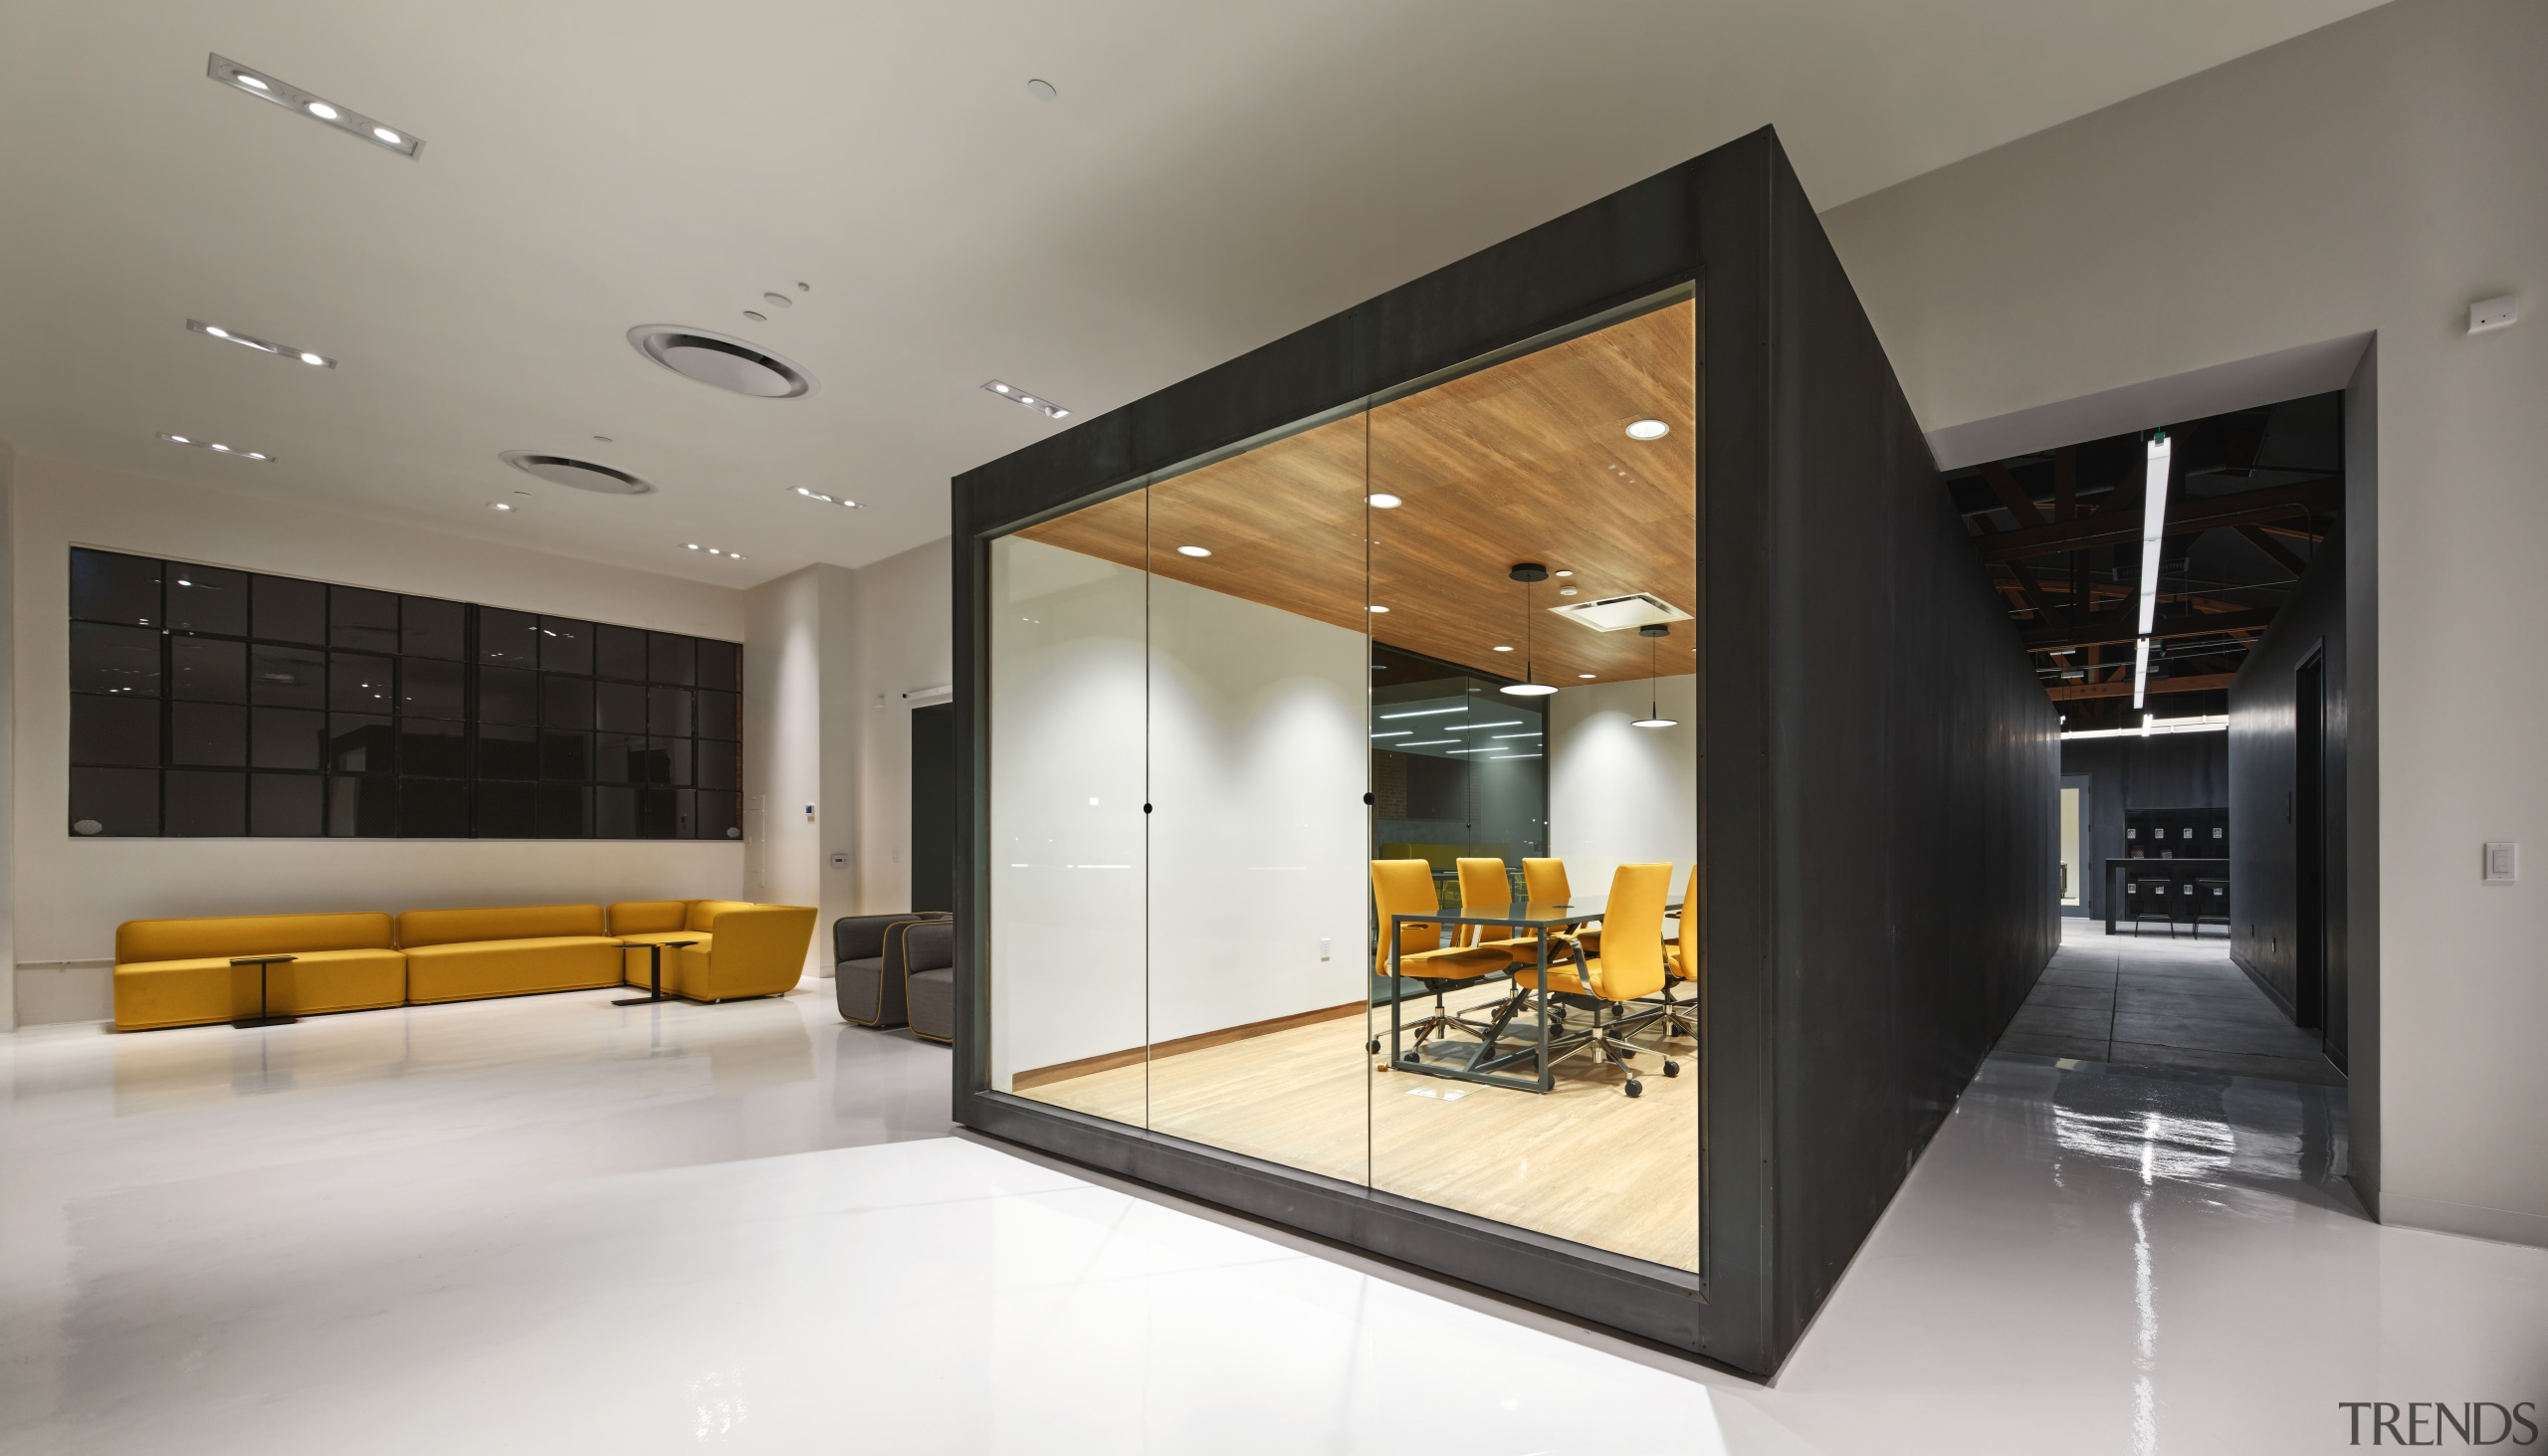 The box-like conference room at Supplyframe DesignLab protrudes architecture, ceiling, house, interior design, lobby, real estate, gray